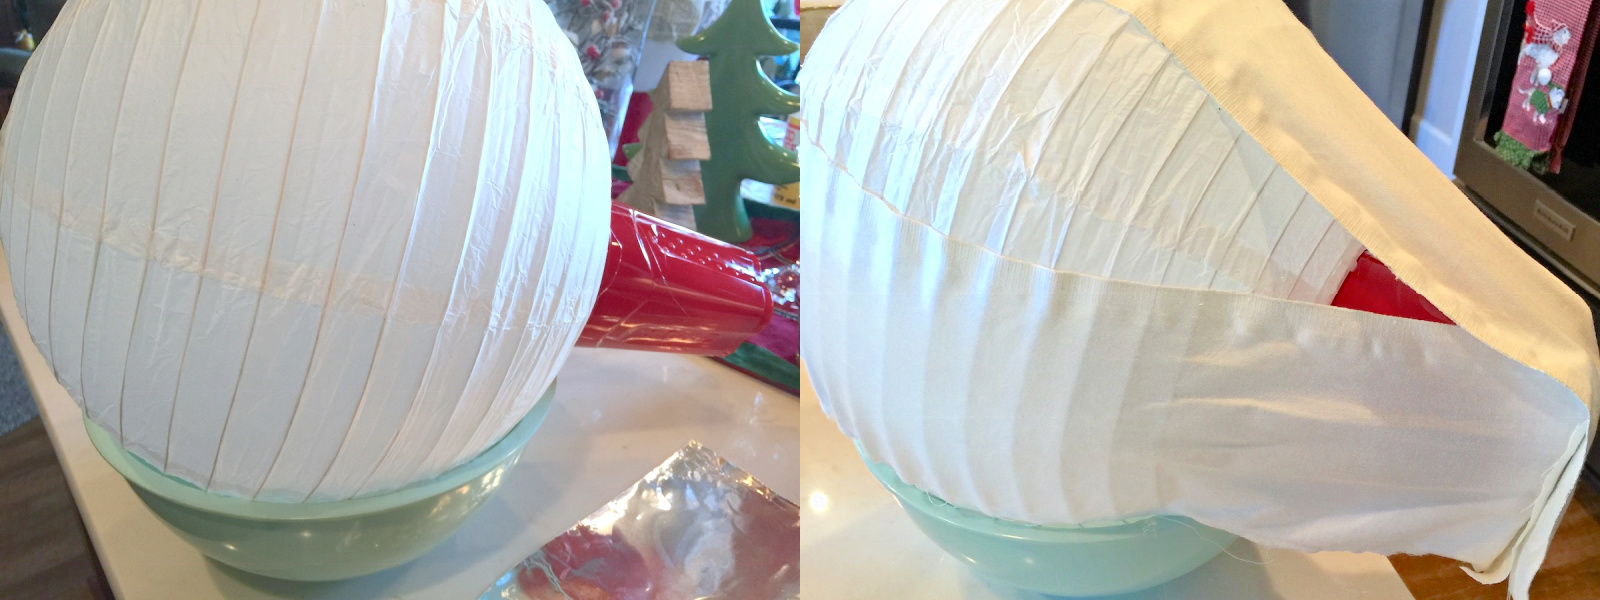 Cup attached to the bottom of a paper lantern and fabric being applied over the top